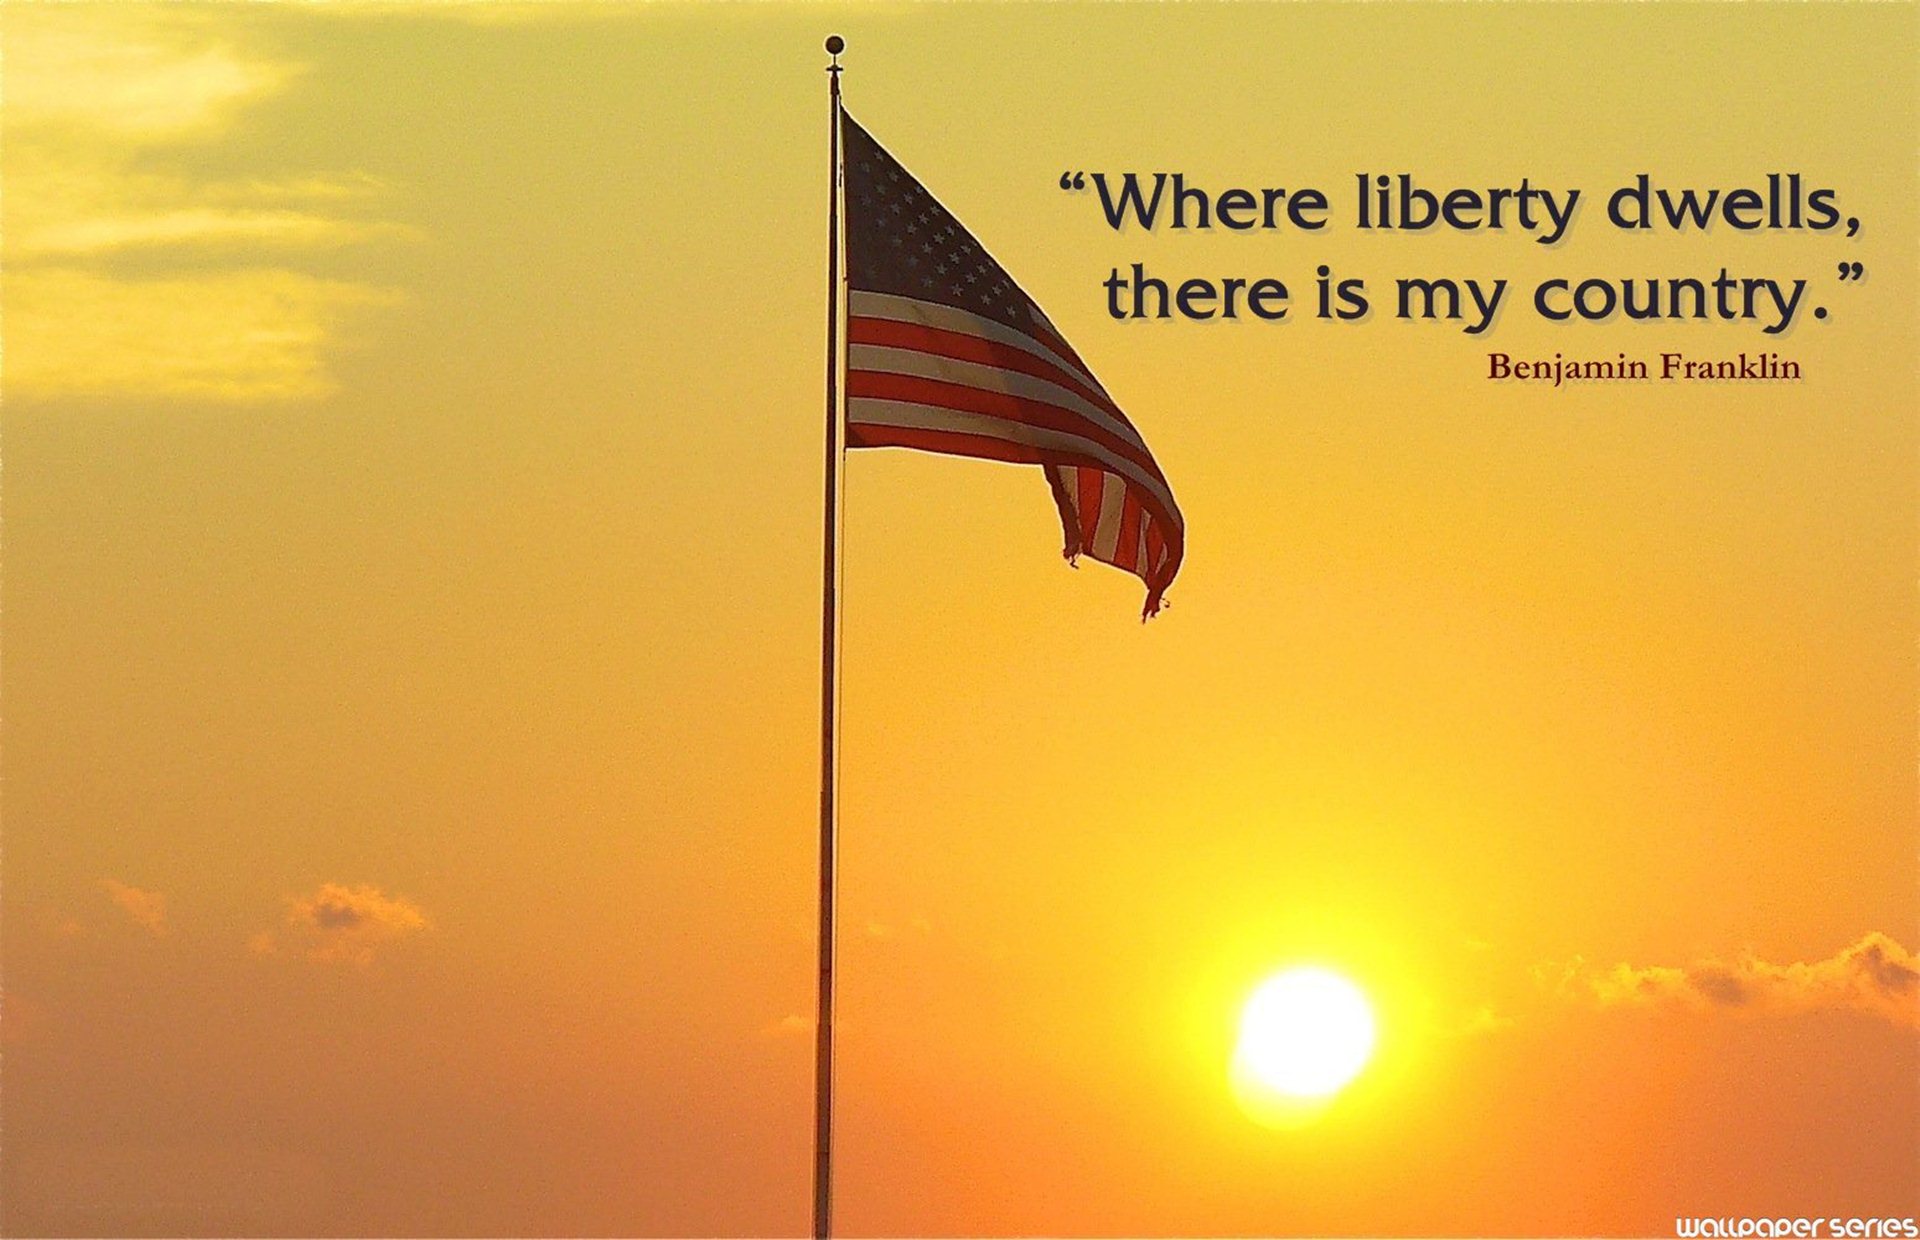 Independence Day America USA Liberty Dwells Quotes Wallpaper 